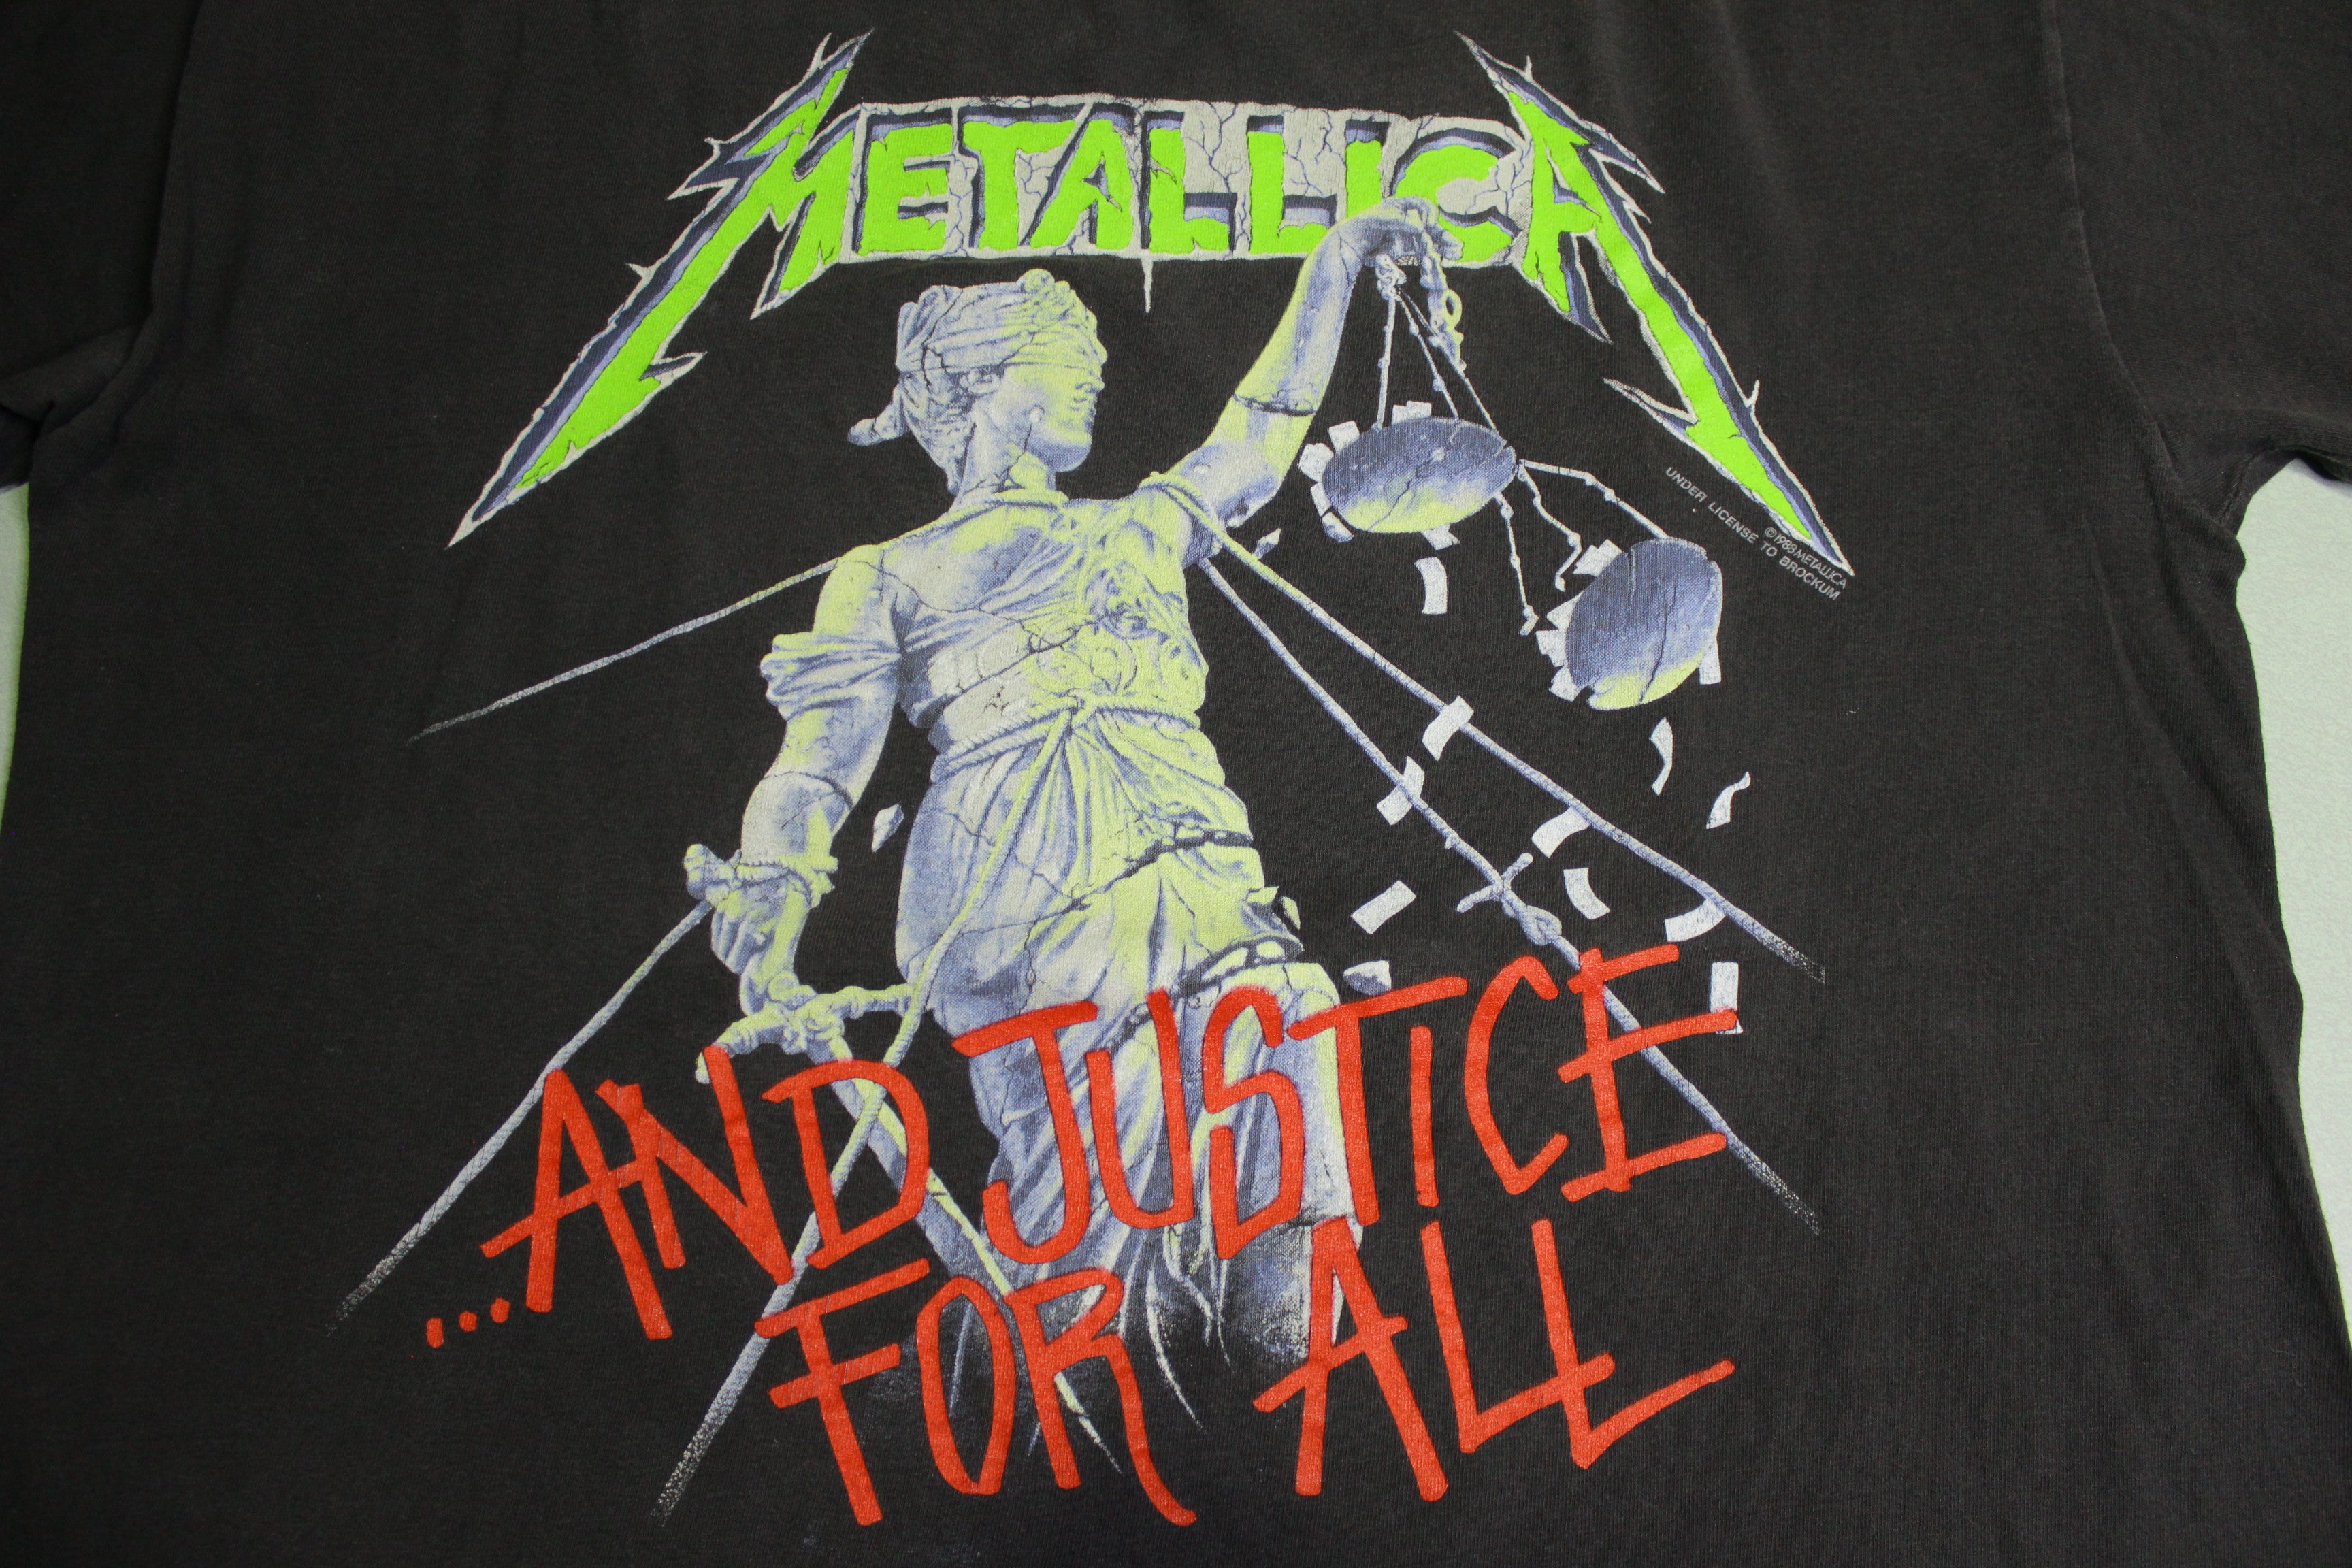 Metallica Justice For All 1988 Hammer Heads Crush You Vintage 80's 